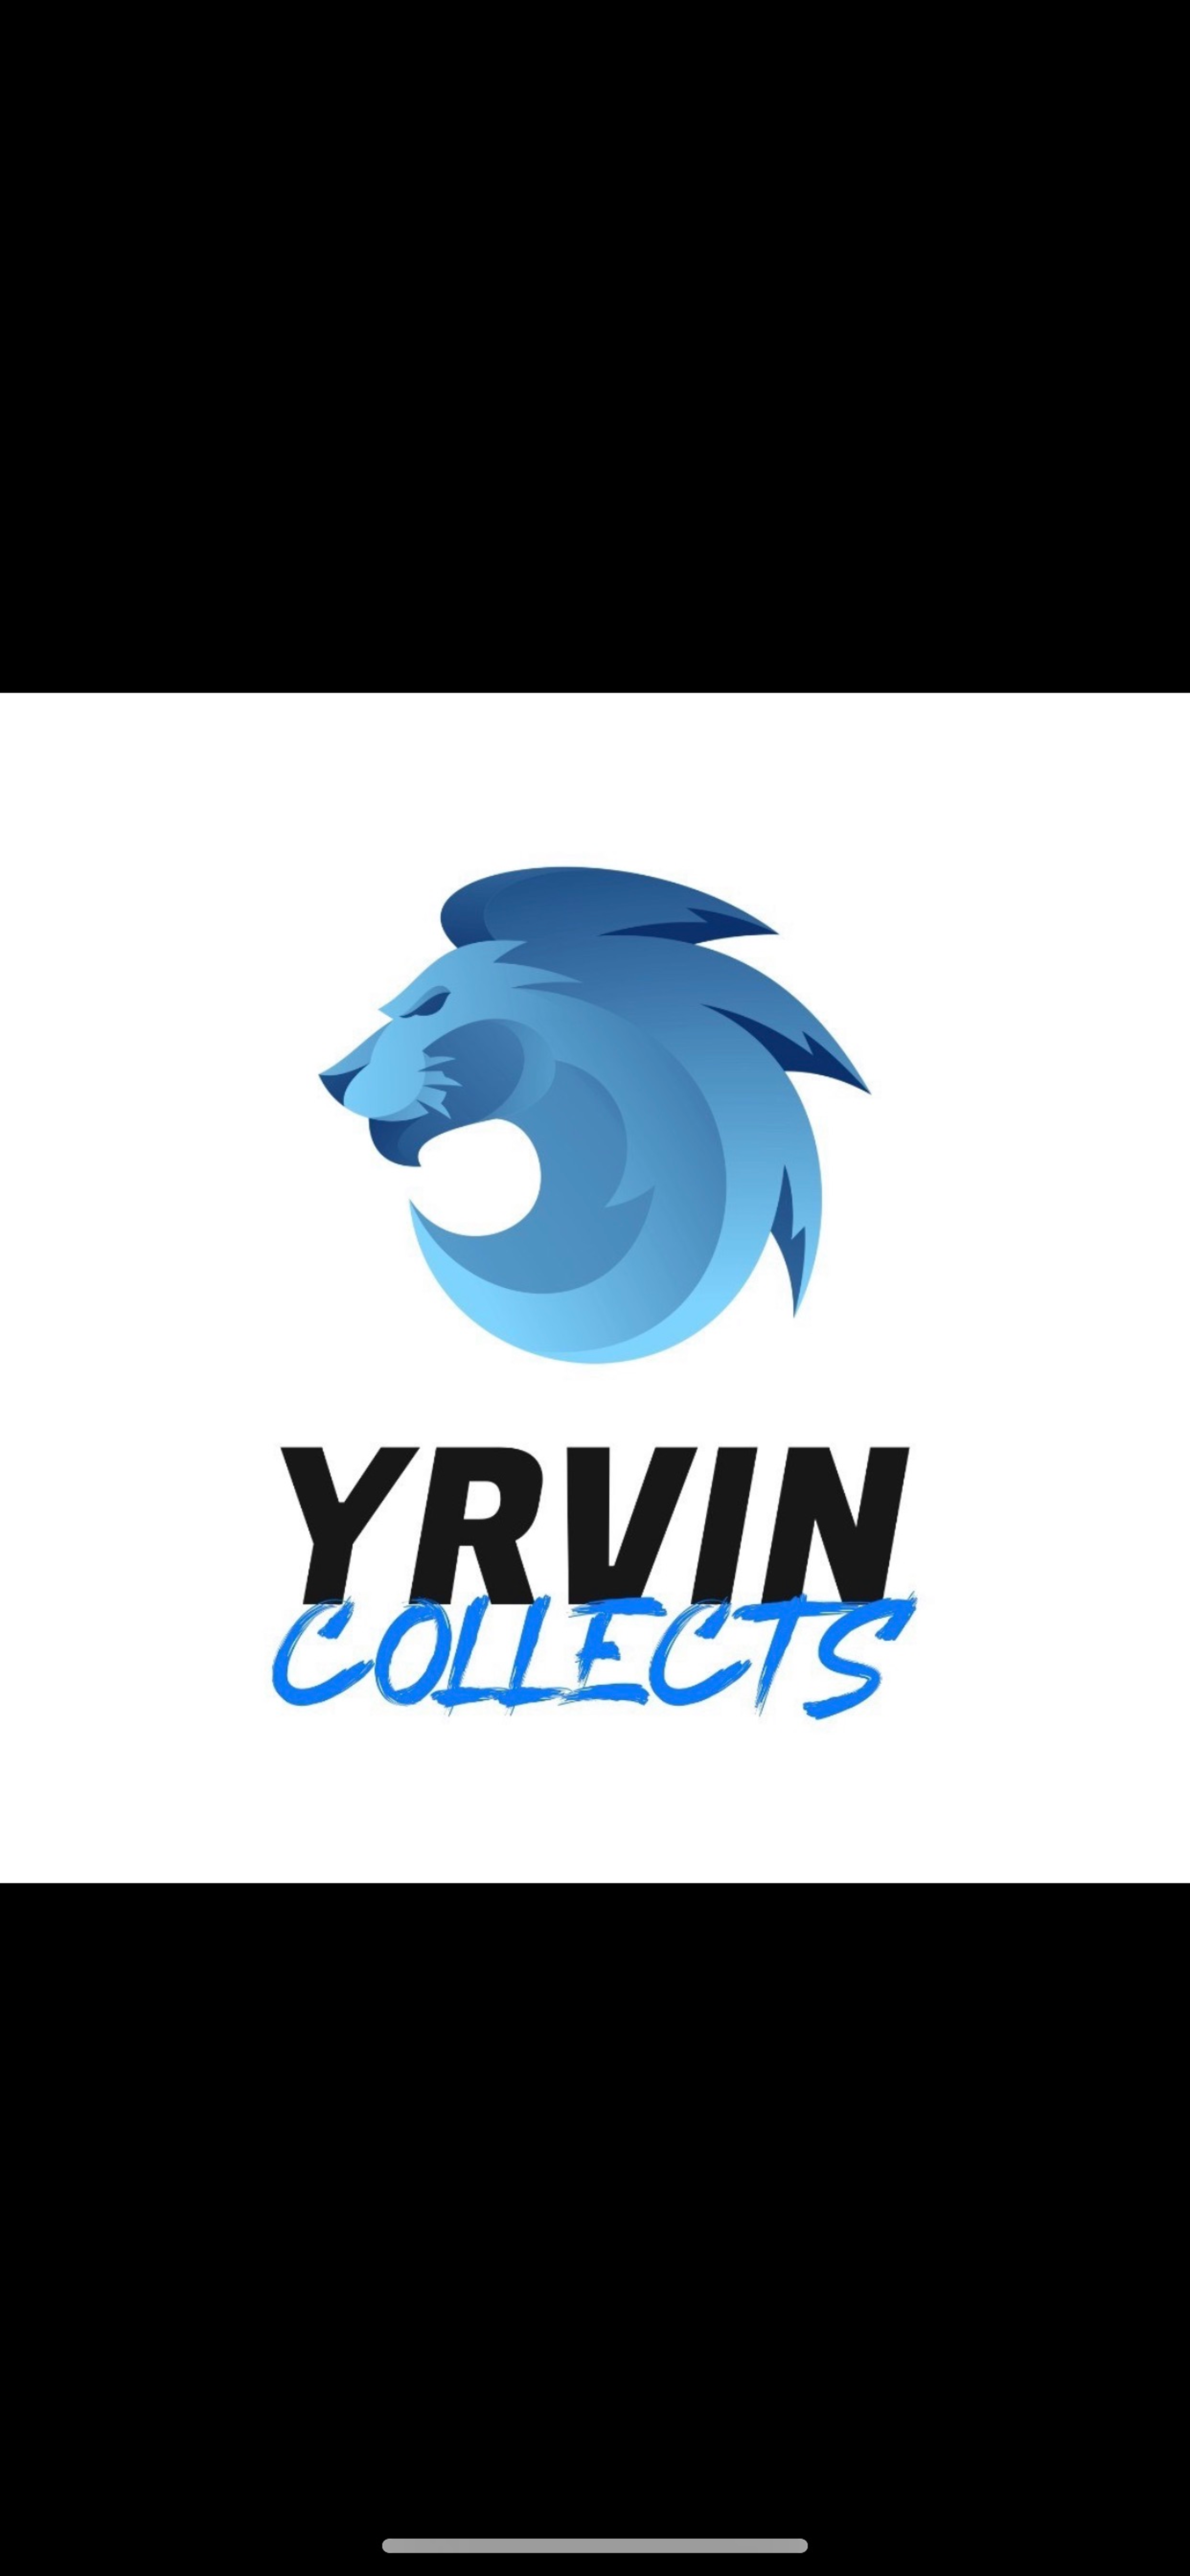 Yrvin_Collects